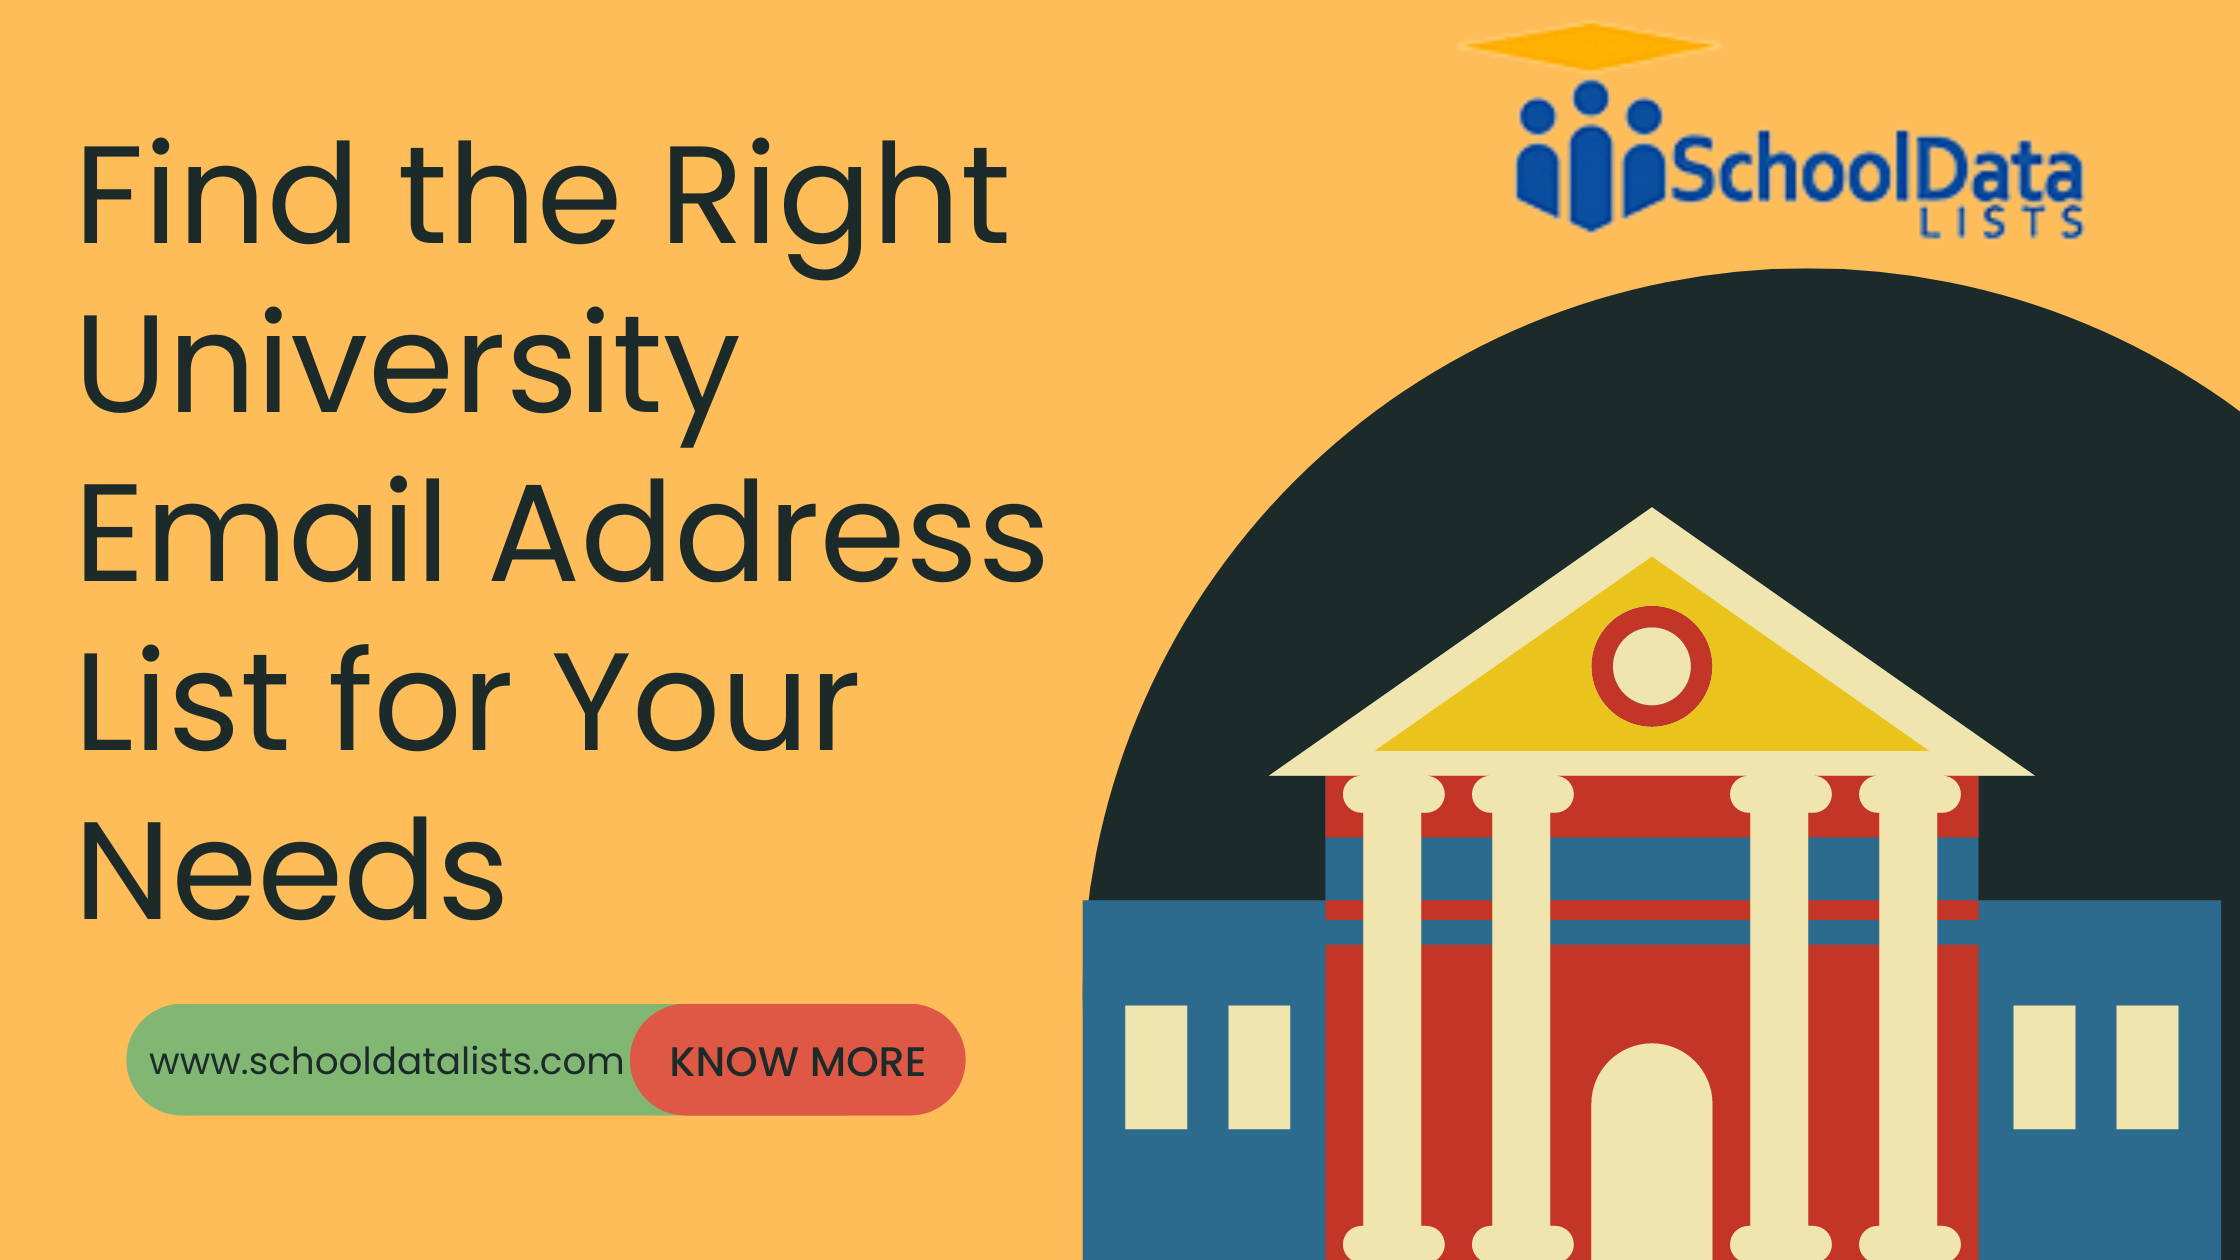 Find the Right University Email Address List for Your Needs